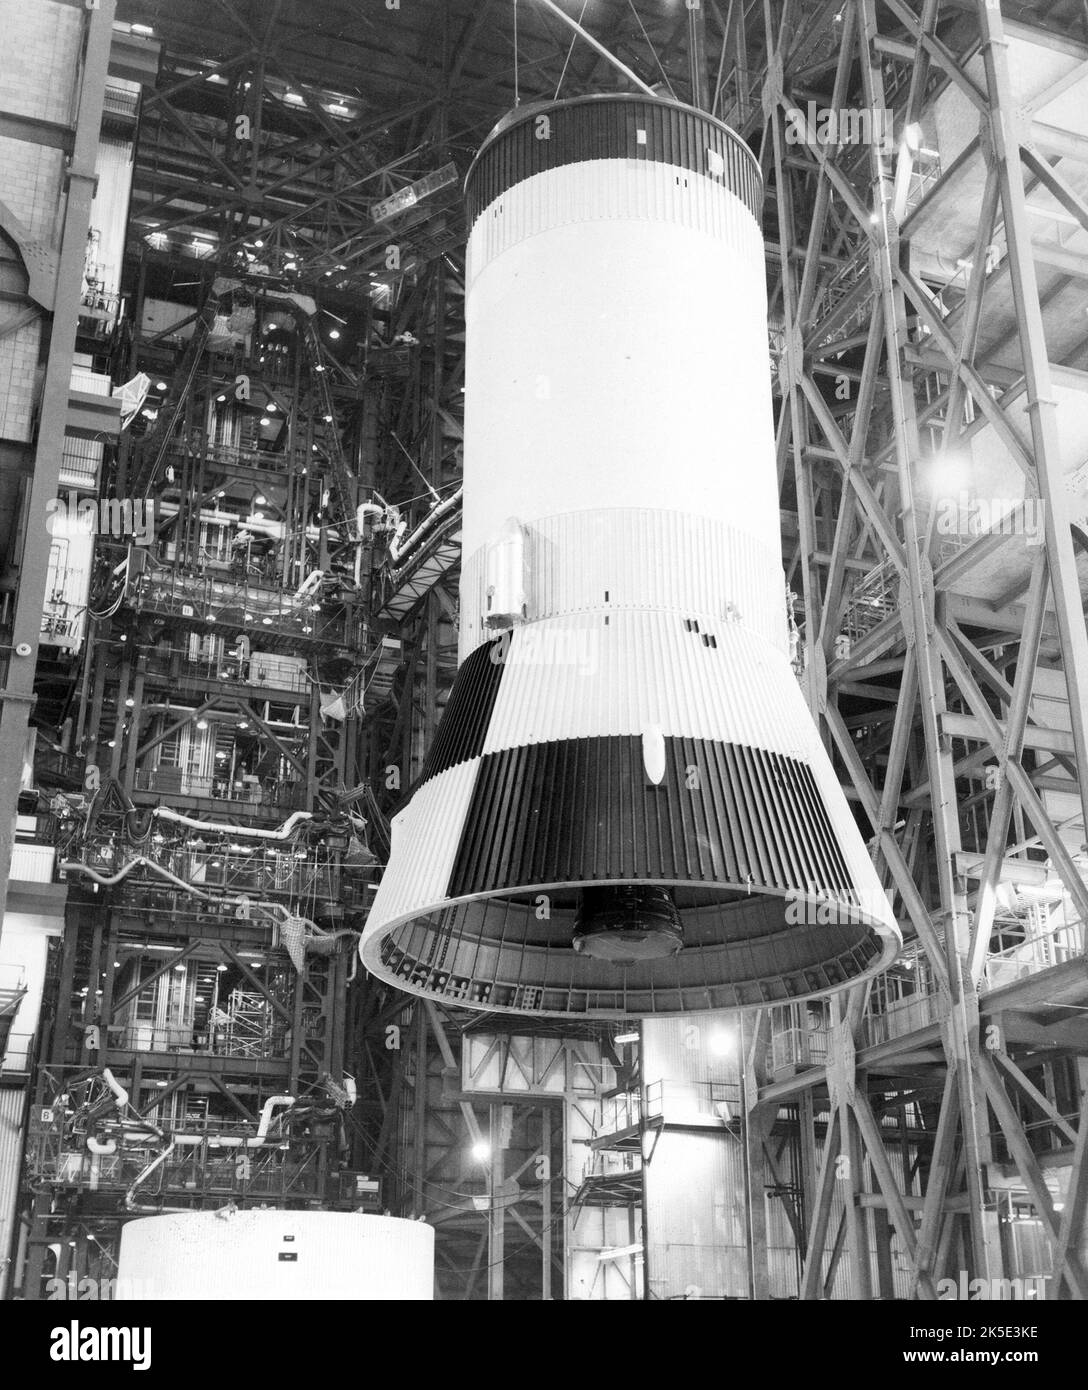 Apollo program. The Saturn IB S-IVB-209 stage was successfully static-fired for a mainstage duration of 465 seconds in the Beta I test stand at Douglas Aircraft's Sacramento Test Operations facility on 20 June 1966. The S-IVB stage was developed under the direction of NASA's Marshall Space Flight Center and was powered by one J-2 engine capable of producing 225,000 lbs of thrust. Here, S-IVB-506, used on Apollo 11, is hoisted in the Vehicle Assembly Building at NASA's Kennedy Space Center for mating with the S-II, or second, stage of the Saturn V rocket An optimised NASA image: Credit: NASA Stock Photo